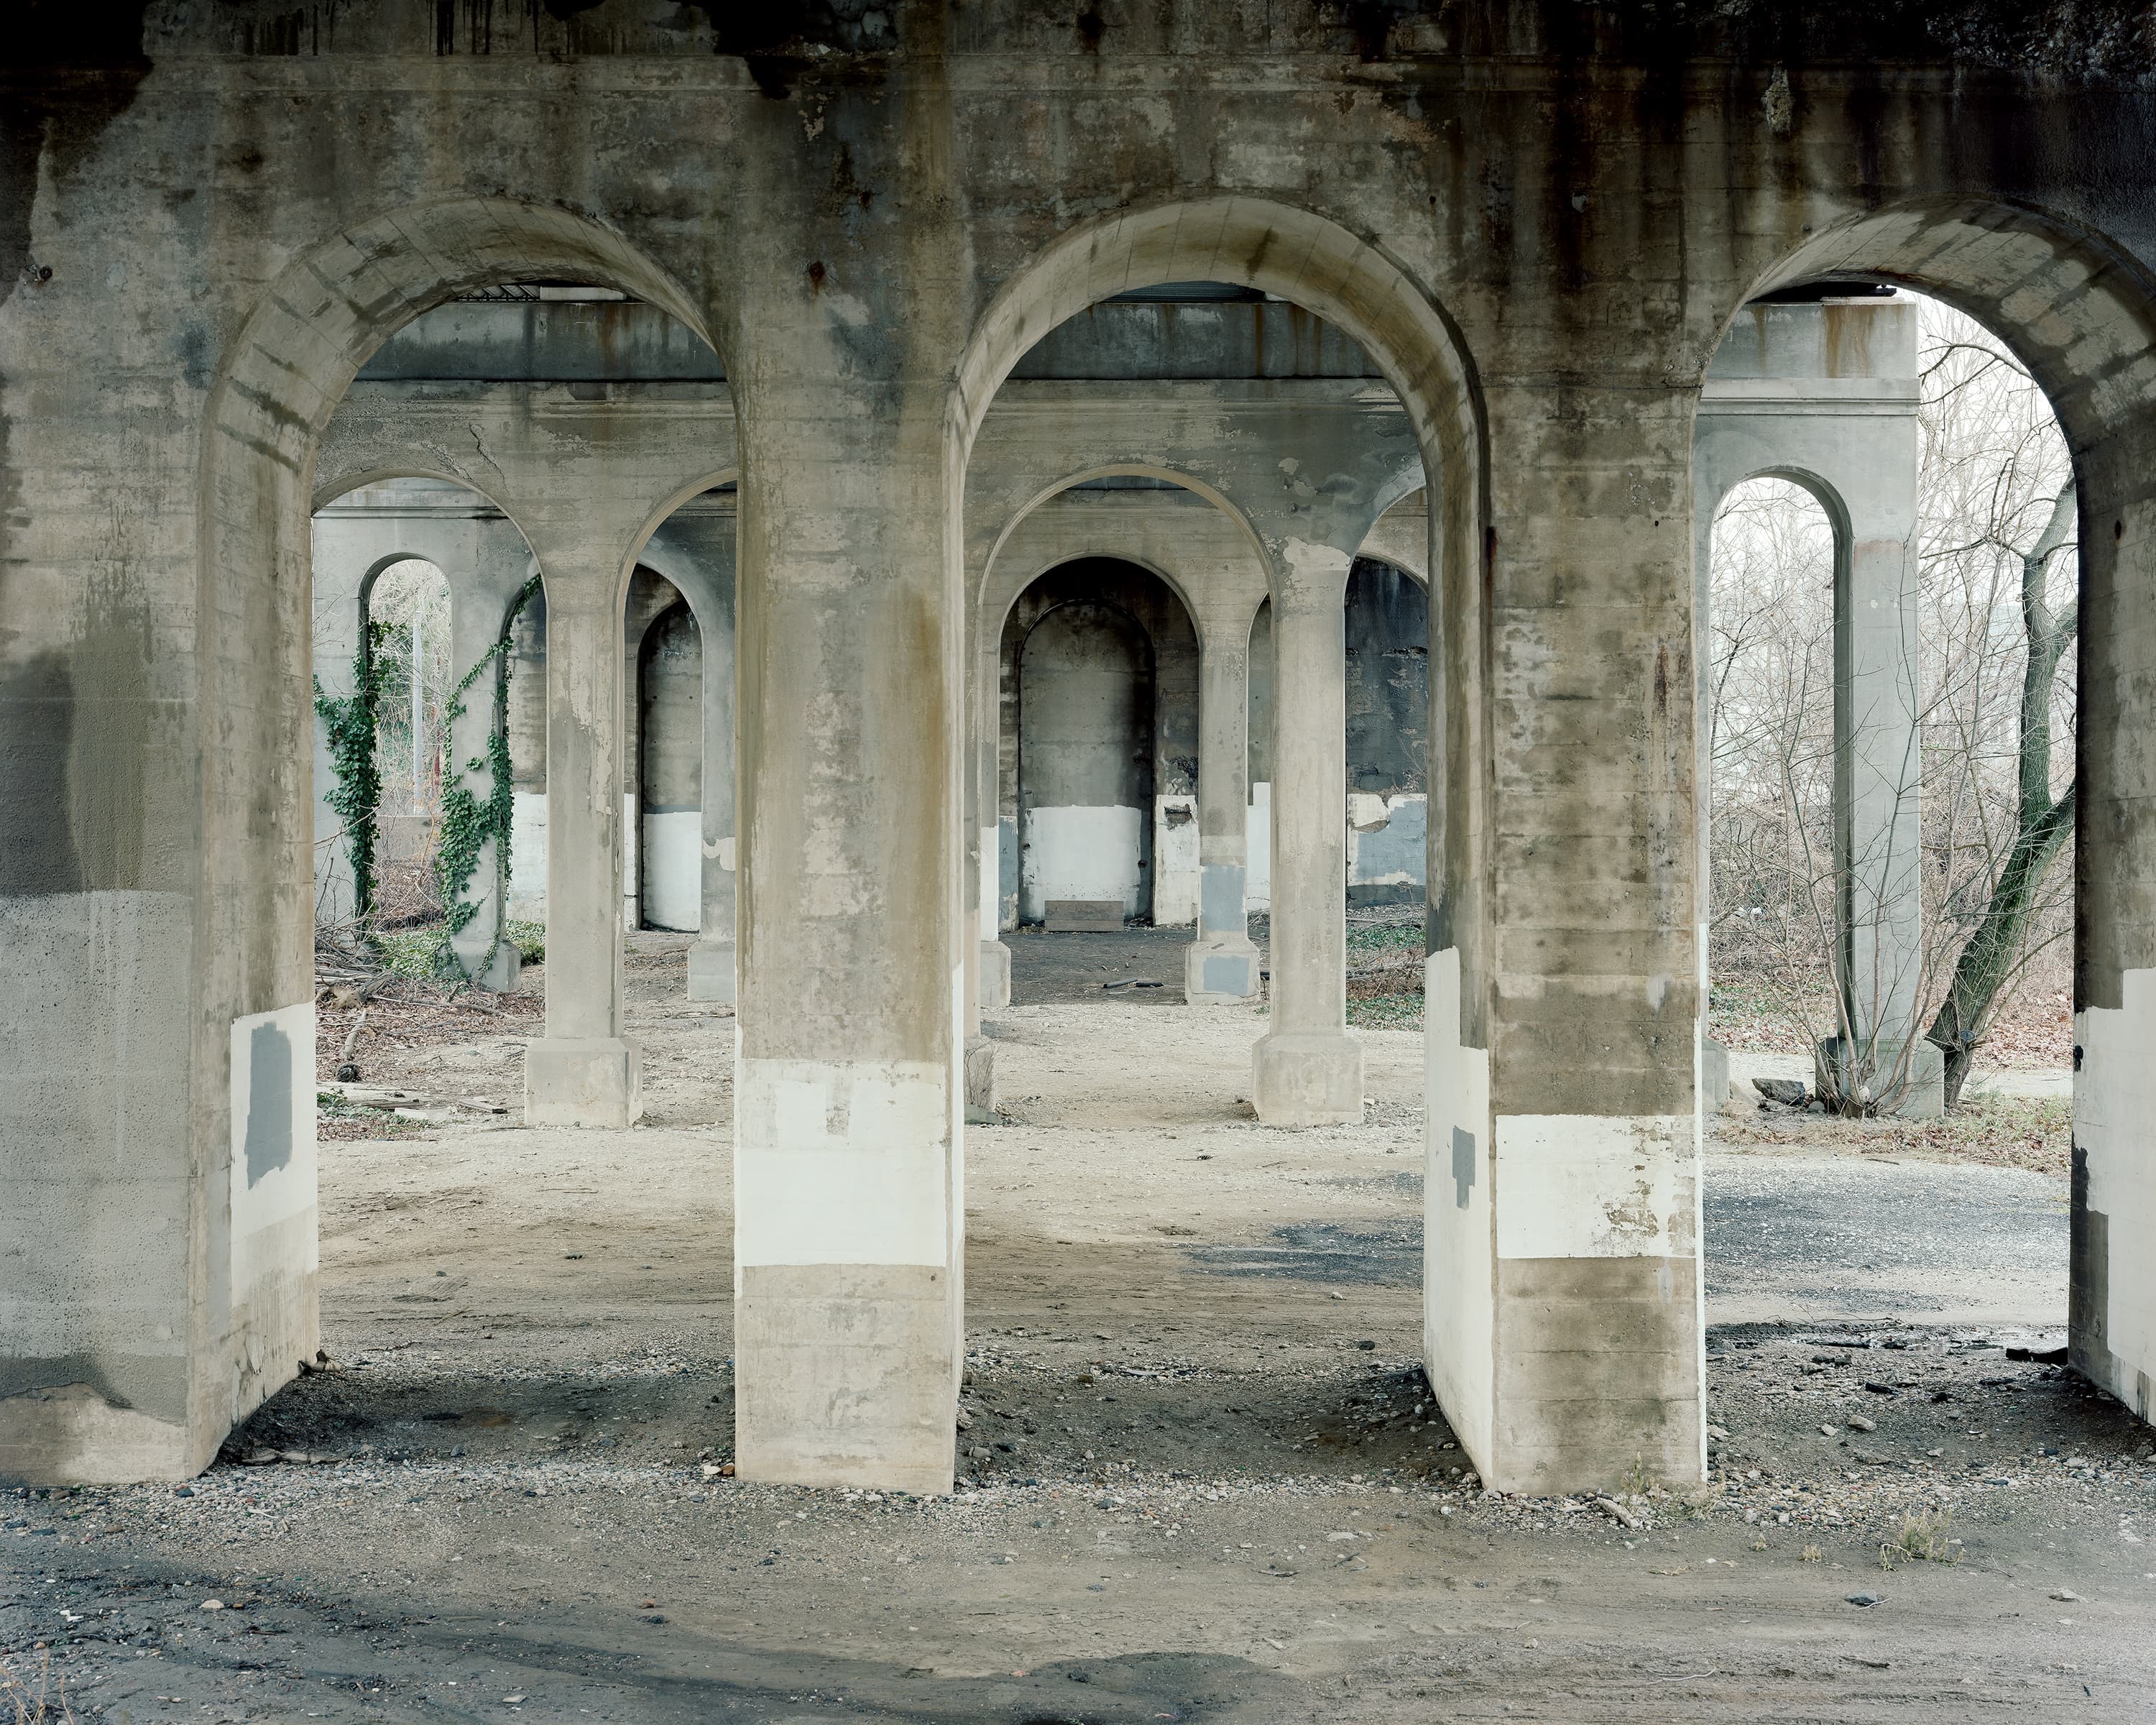 Underneath an arched railway bridge in Baltimore, piers are whitewashed to cover graffiti.